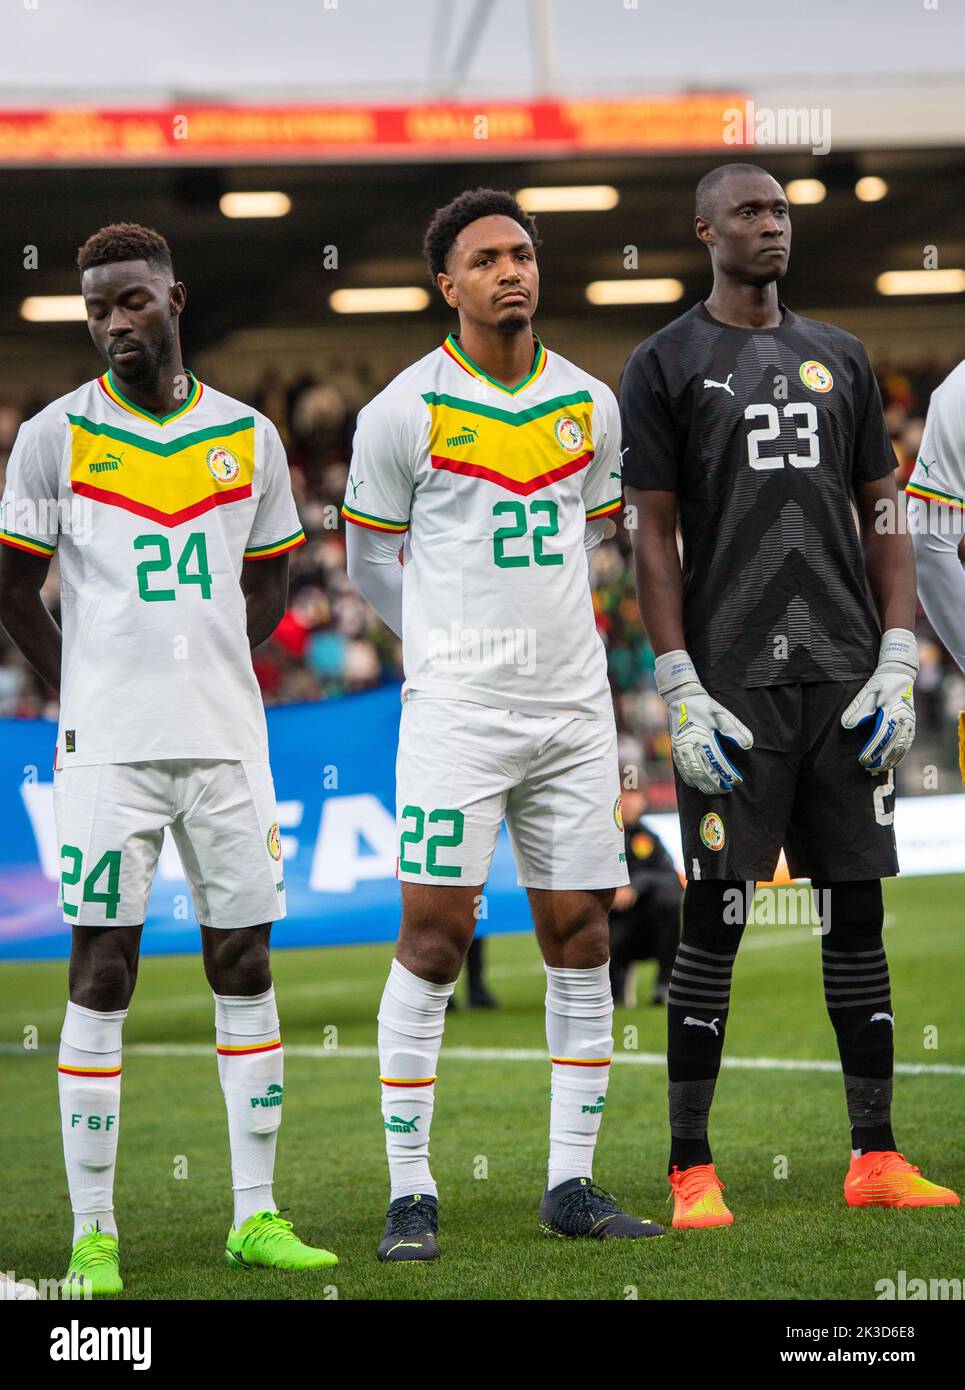 ORLEANS, FRANCE - SEPTEMBER 24: Moustapha Name, Abdou Diallo, Alfred Gomis of Senegal look on as the national anthems are played during the internatio Stock Photo